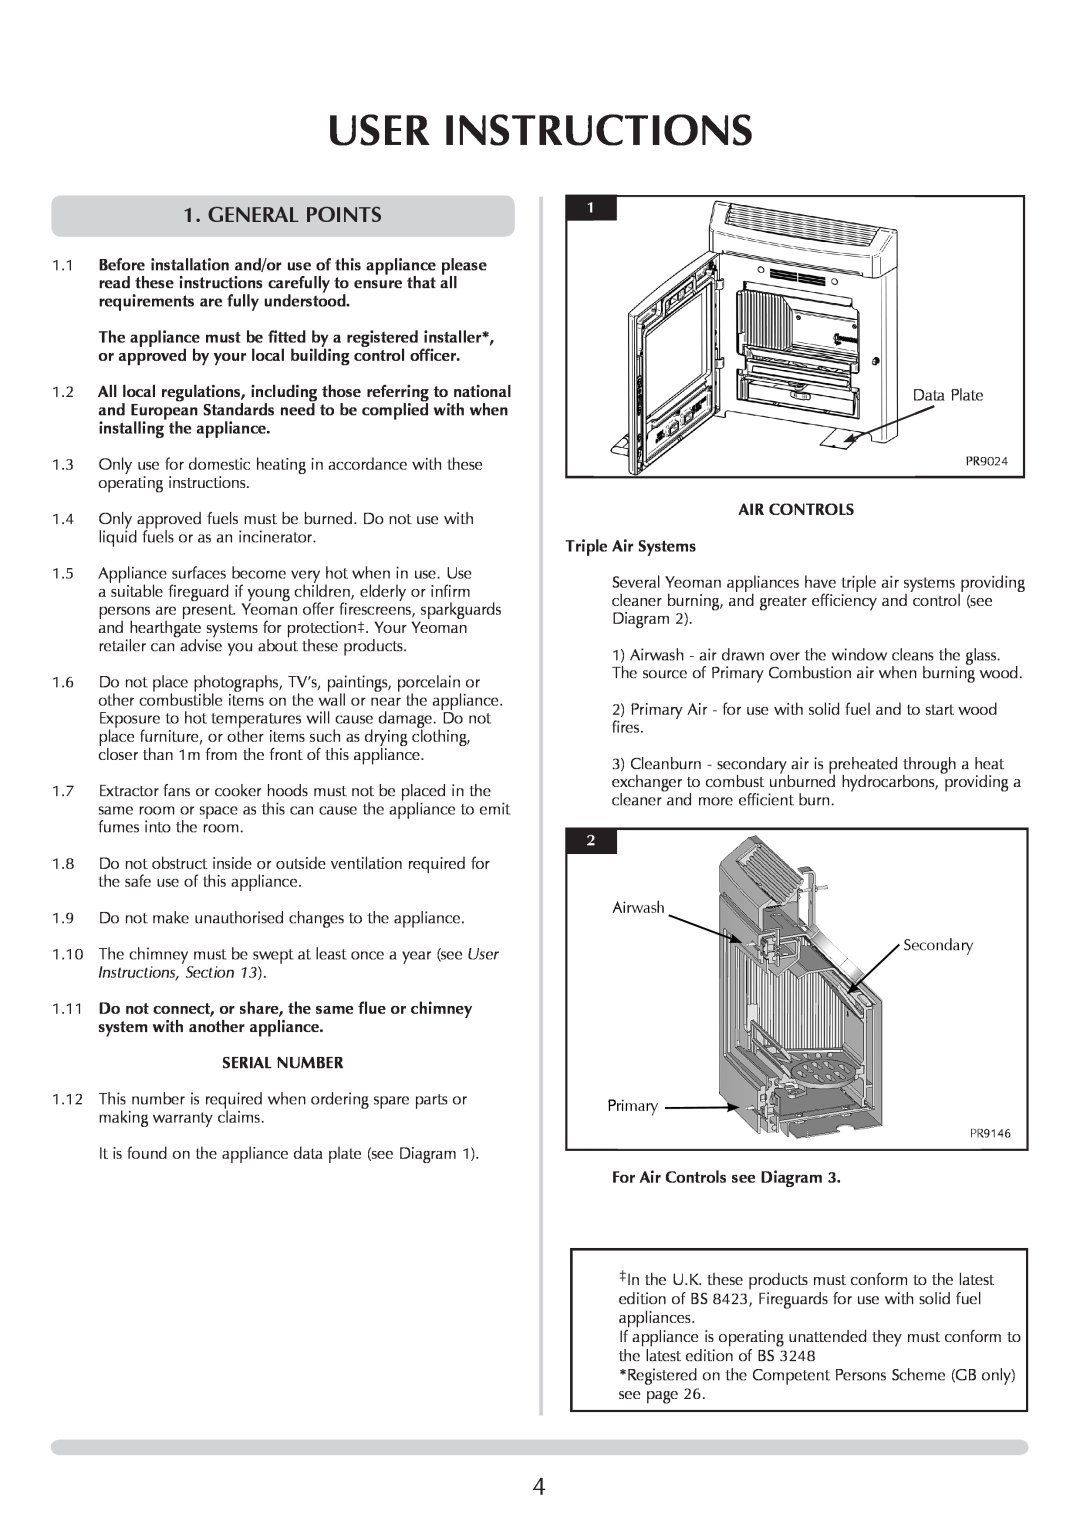 Yeoman YMMB manual User Instructions, General POINTS 